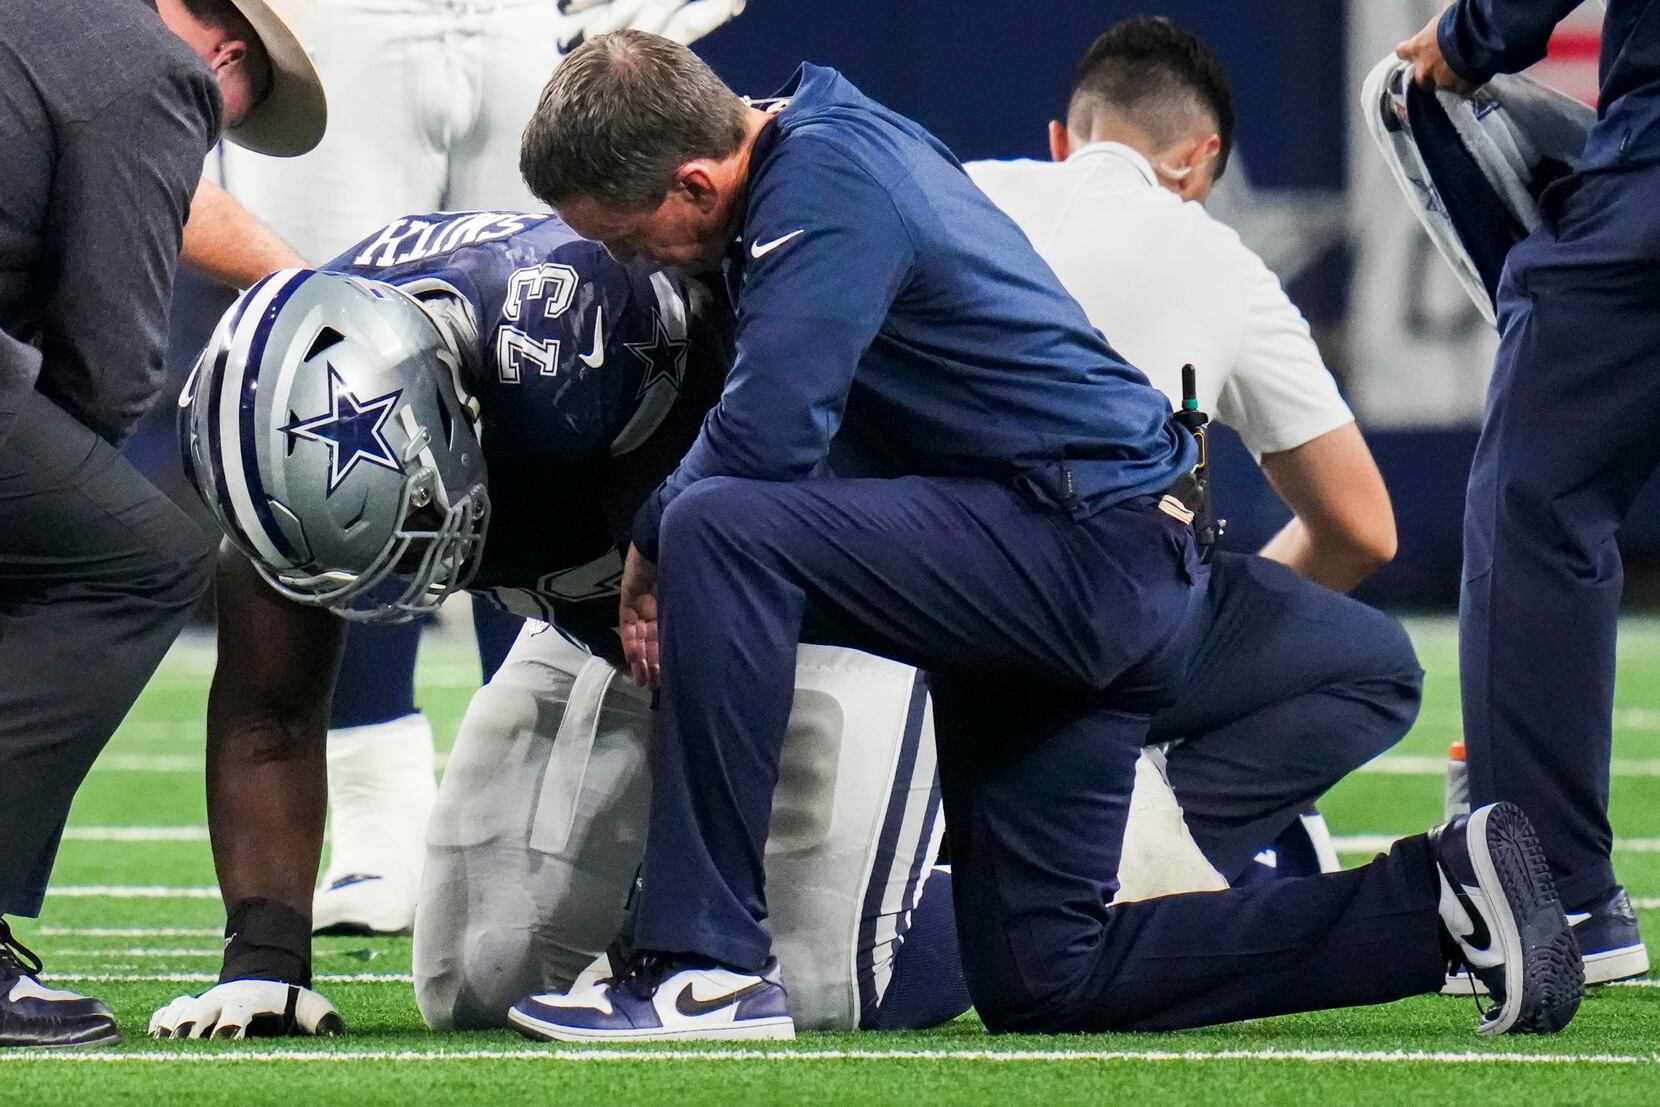 Cowboys guard Tyler Smith completely tore plantar fascia vs. Lions